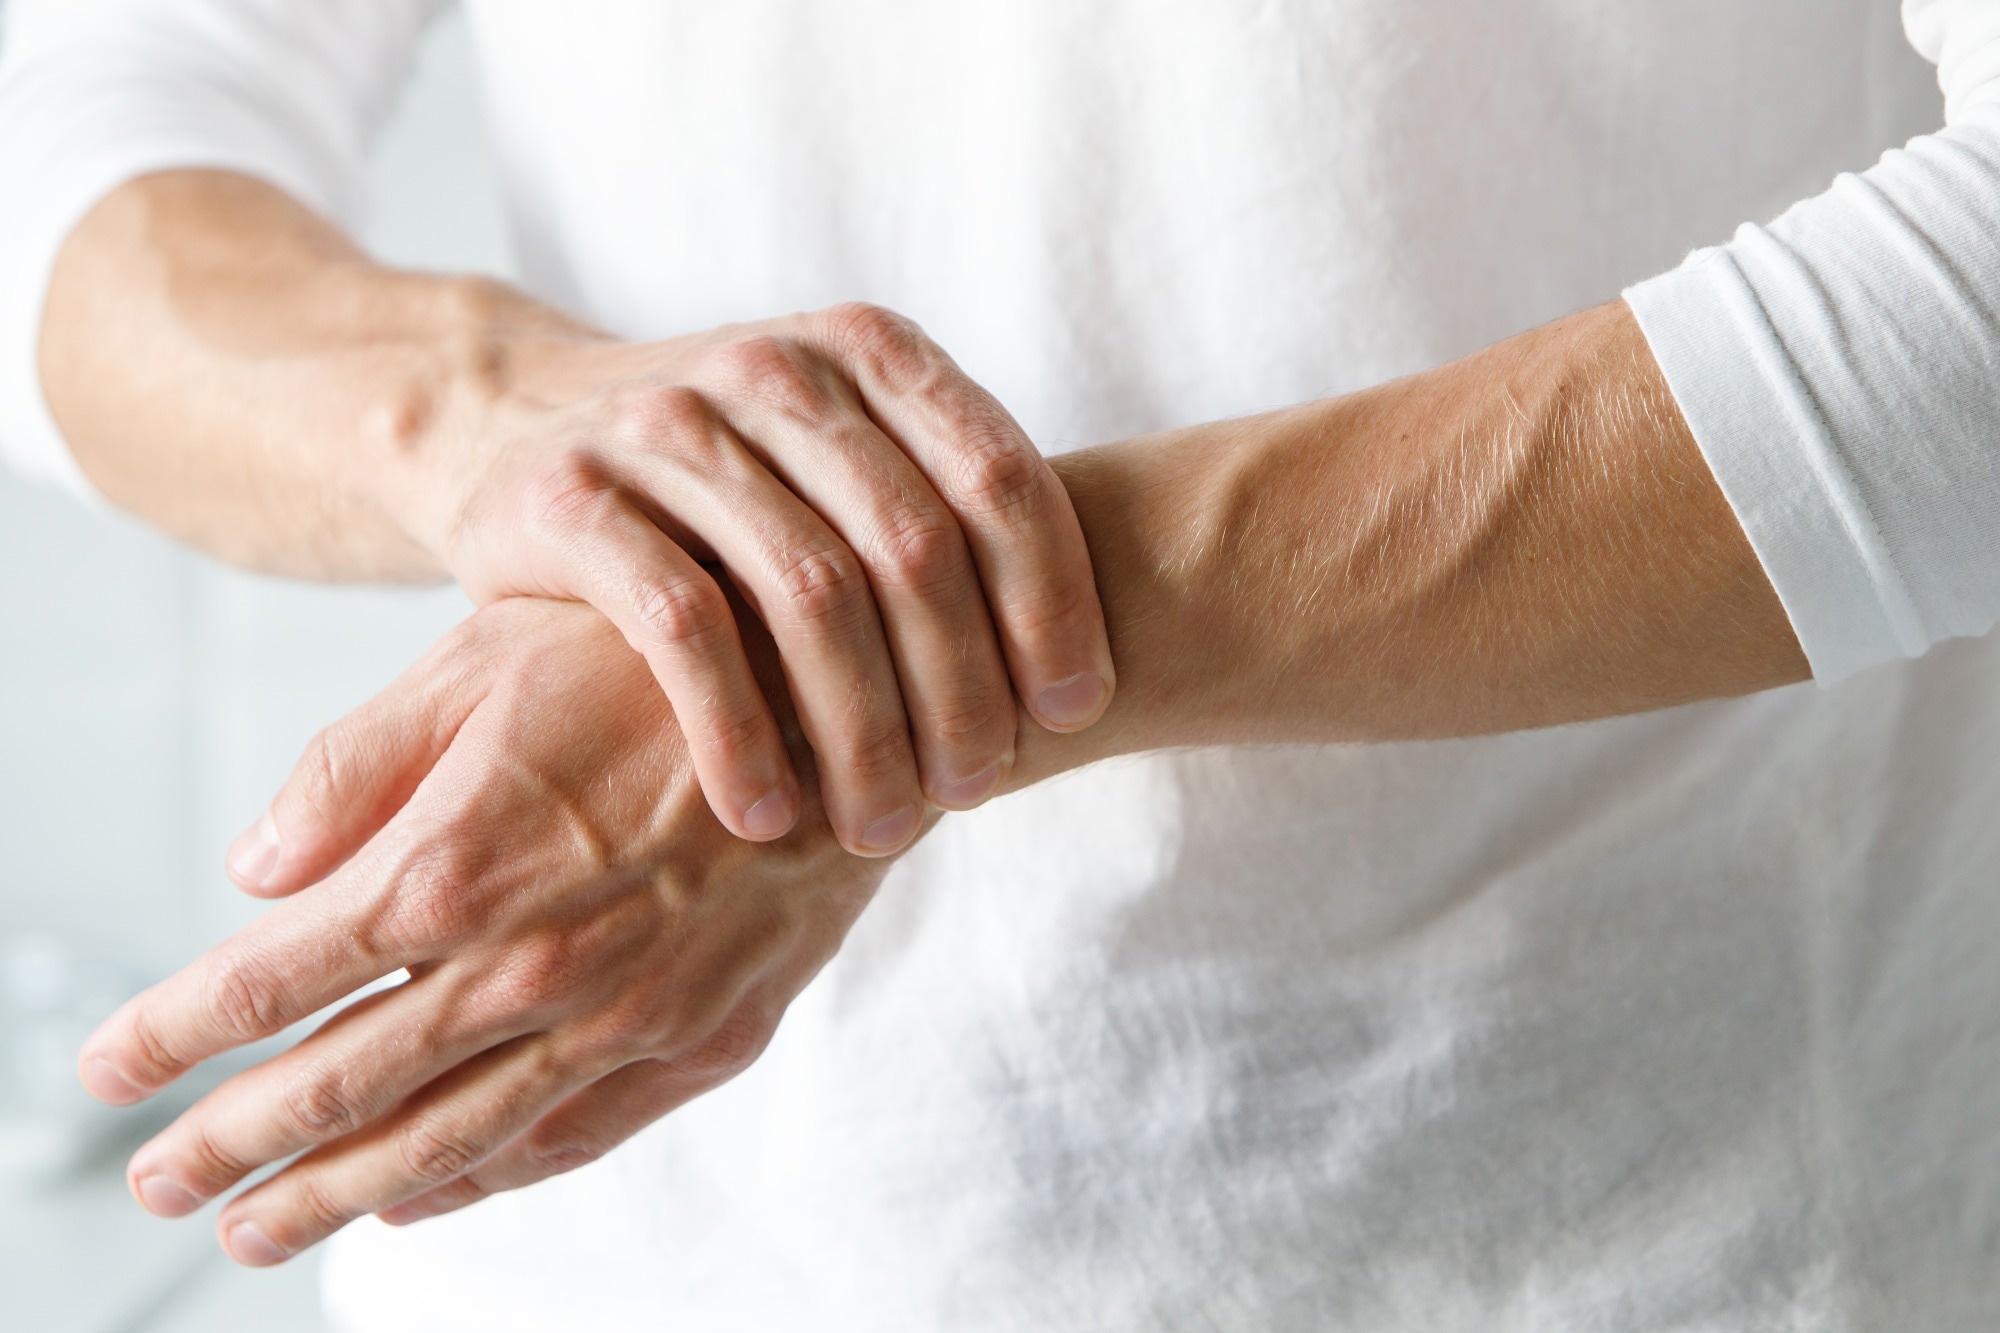 Study: Decreased responses to mRNA-based SARS-CoV-2 vaccines in individuals with rheumatoid arthritis receiving immune-modifying therapies.  Image Credit: DimaBerlin/Shutterstock